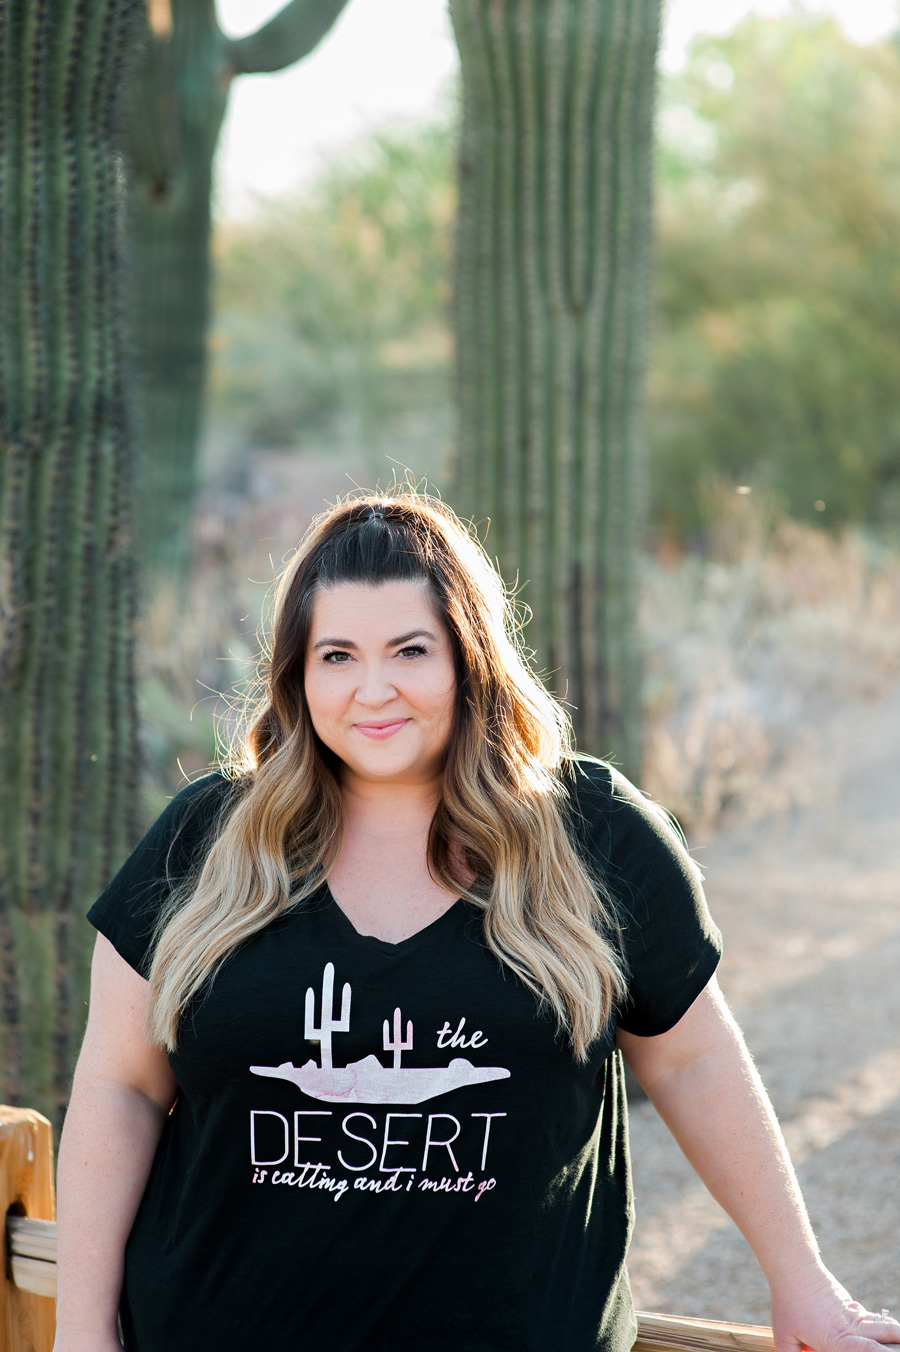 DIY The Desert is Calling T-Shirt using Cricut Patterned Iron-On